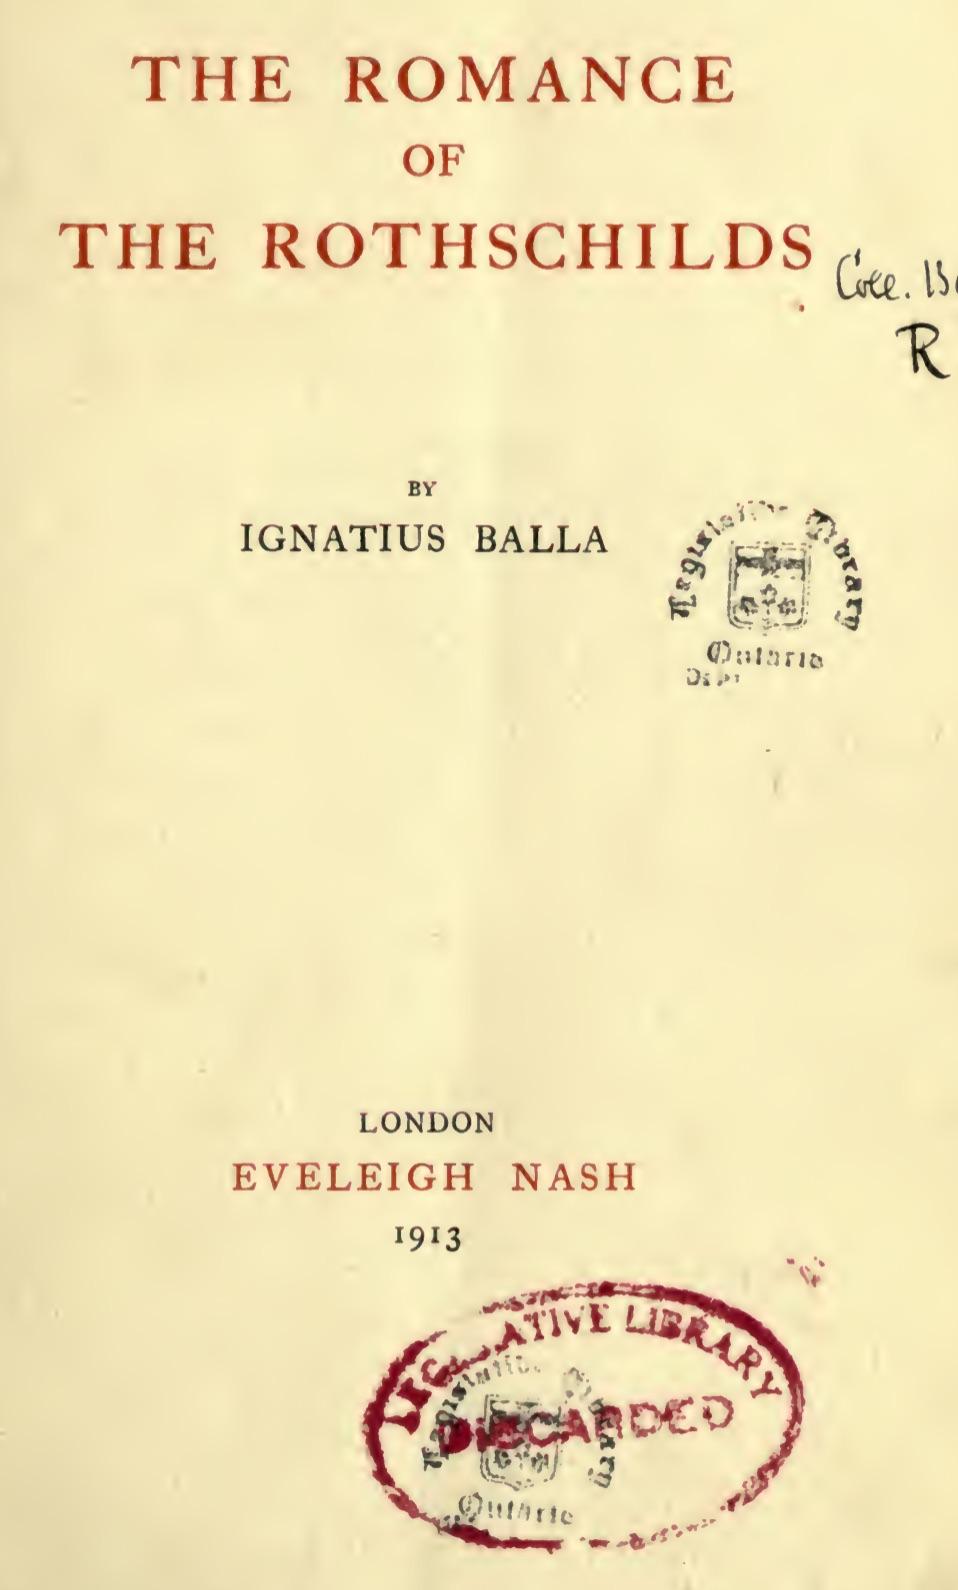 The Romance of the Rothschilds (1913) by Ignatius Balla